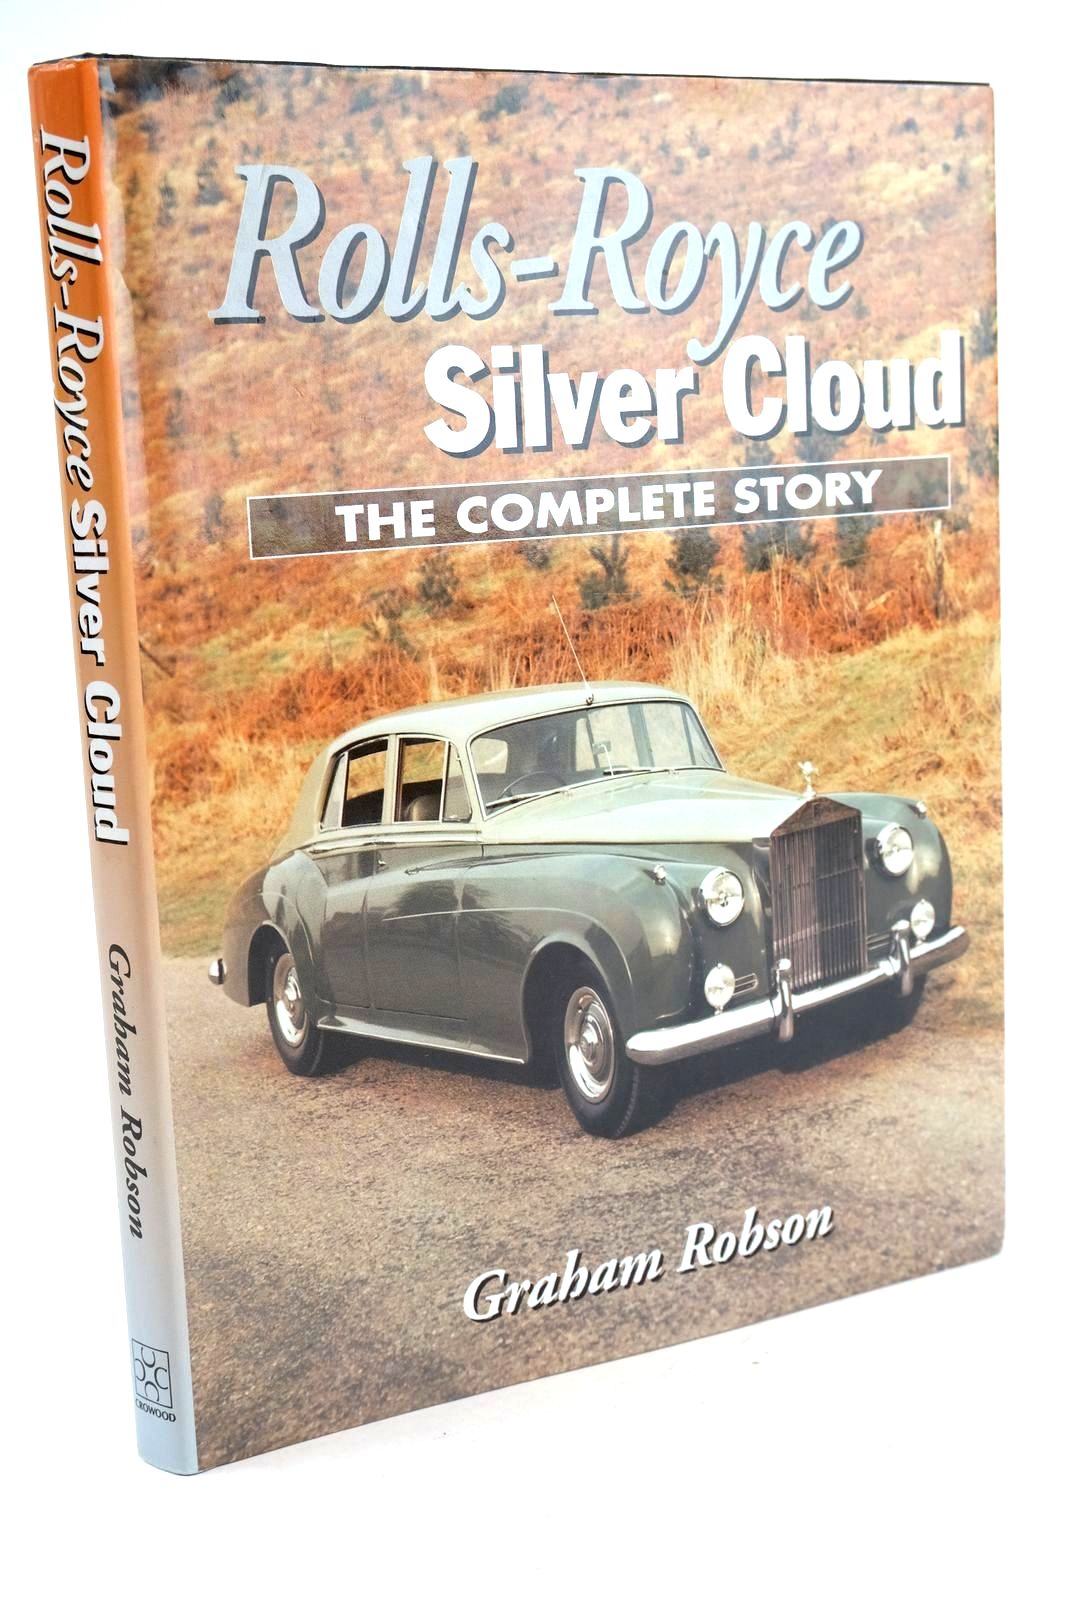 Photo of ROLLS-ROYCE SILVER CLOUD THE COMPLETE STORY written by Robson, Graham published by The Crowood Press (STOCK CODE: 1324385)  for sale by Stella & Rose's Books